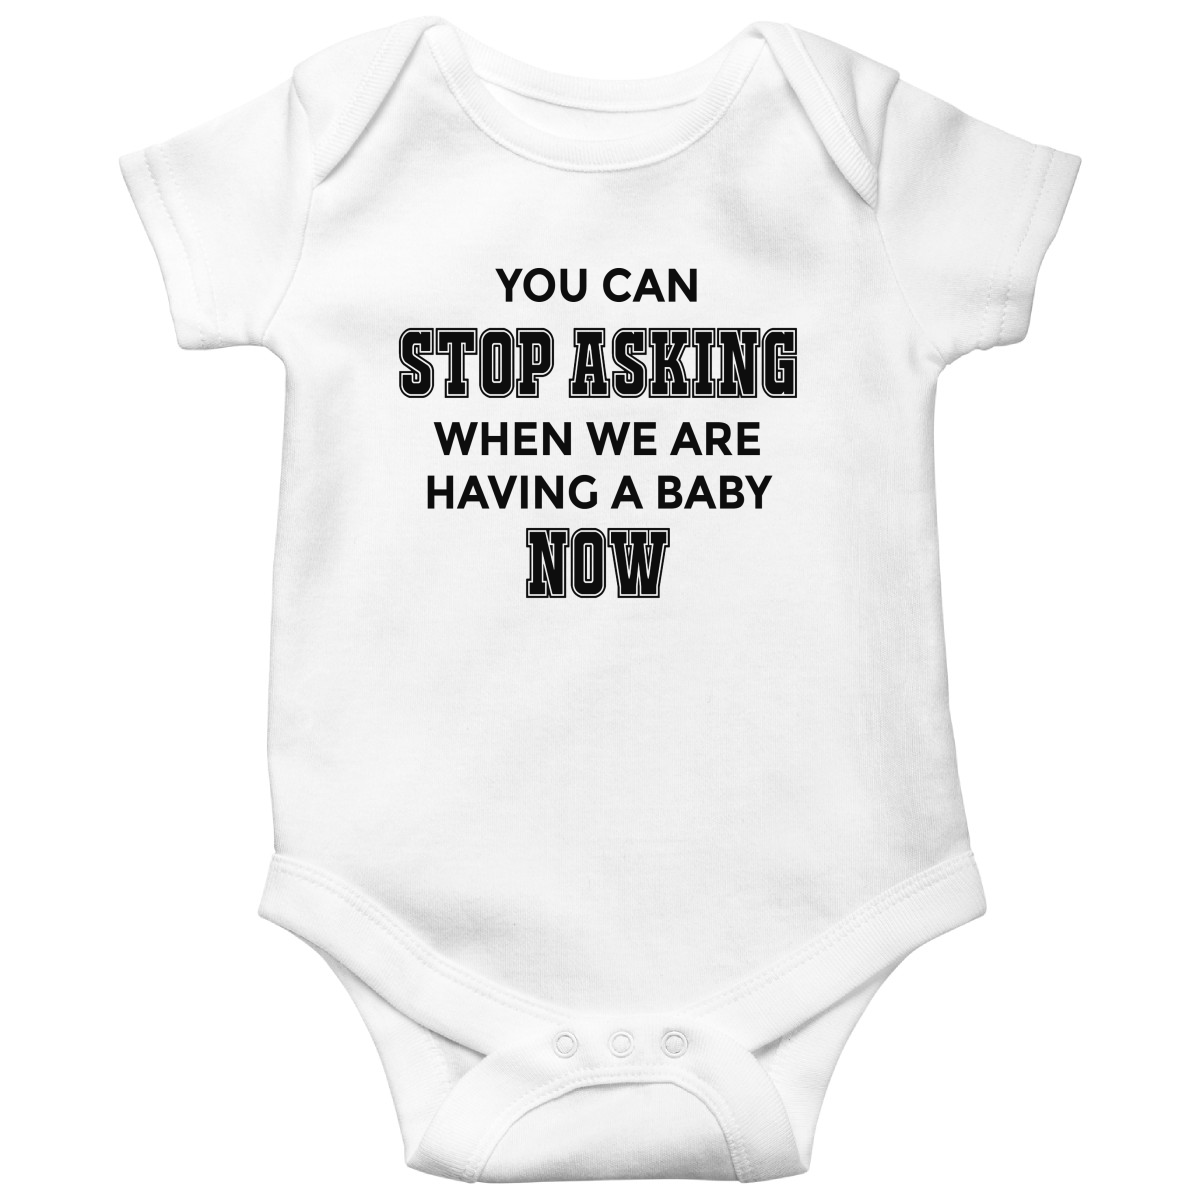 You can stop asking when we are having baby NOW Baby Bodysuits | White